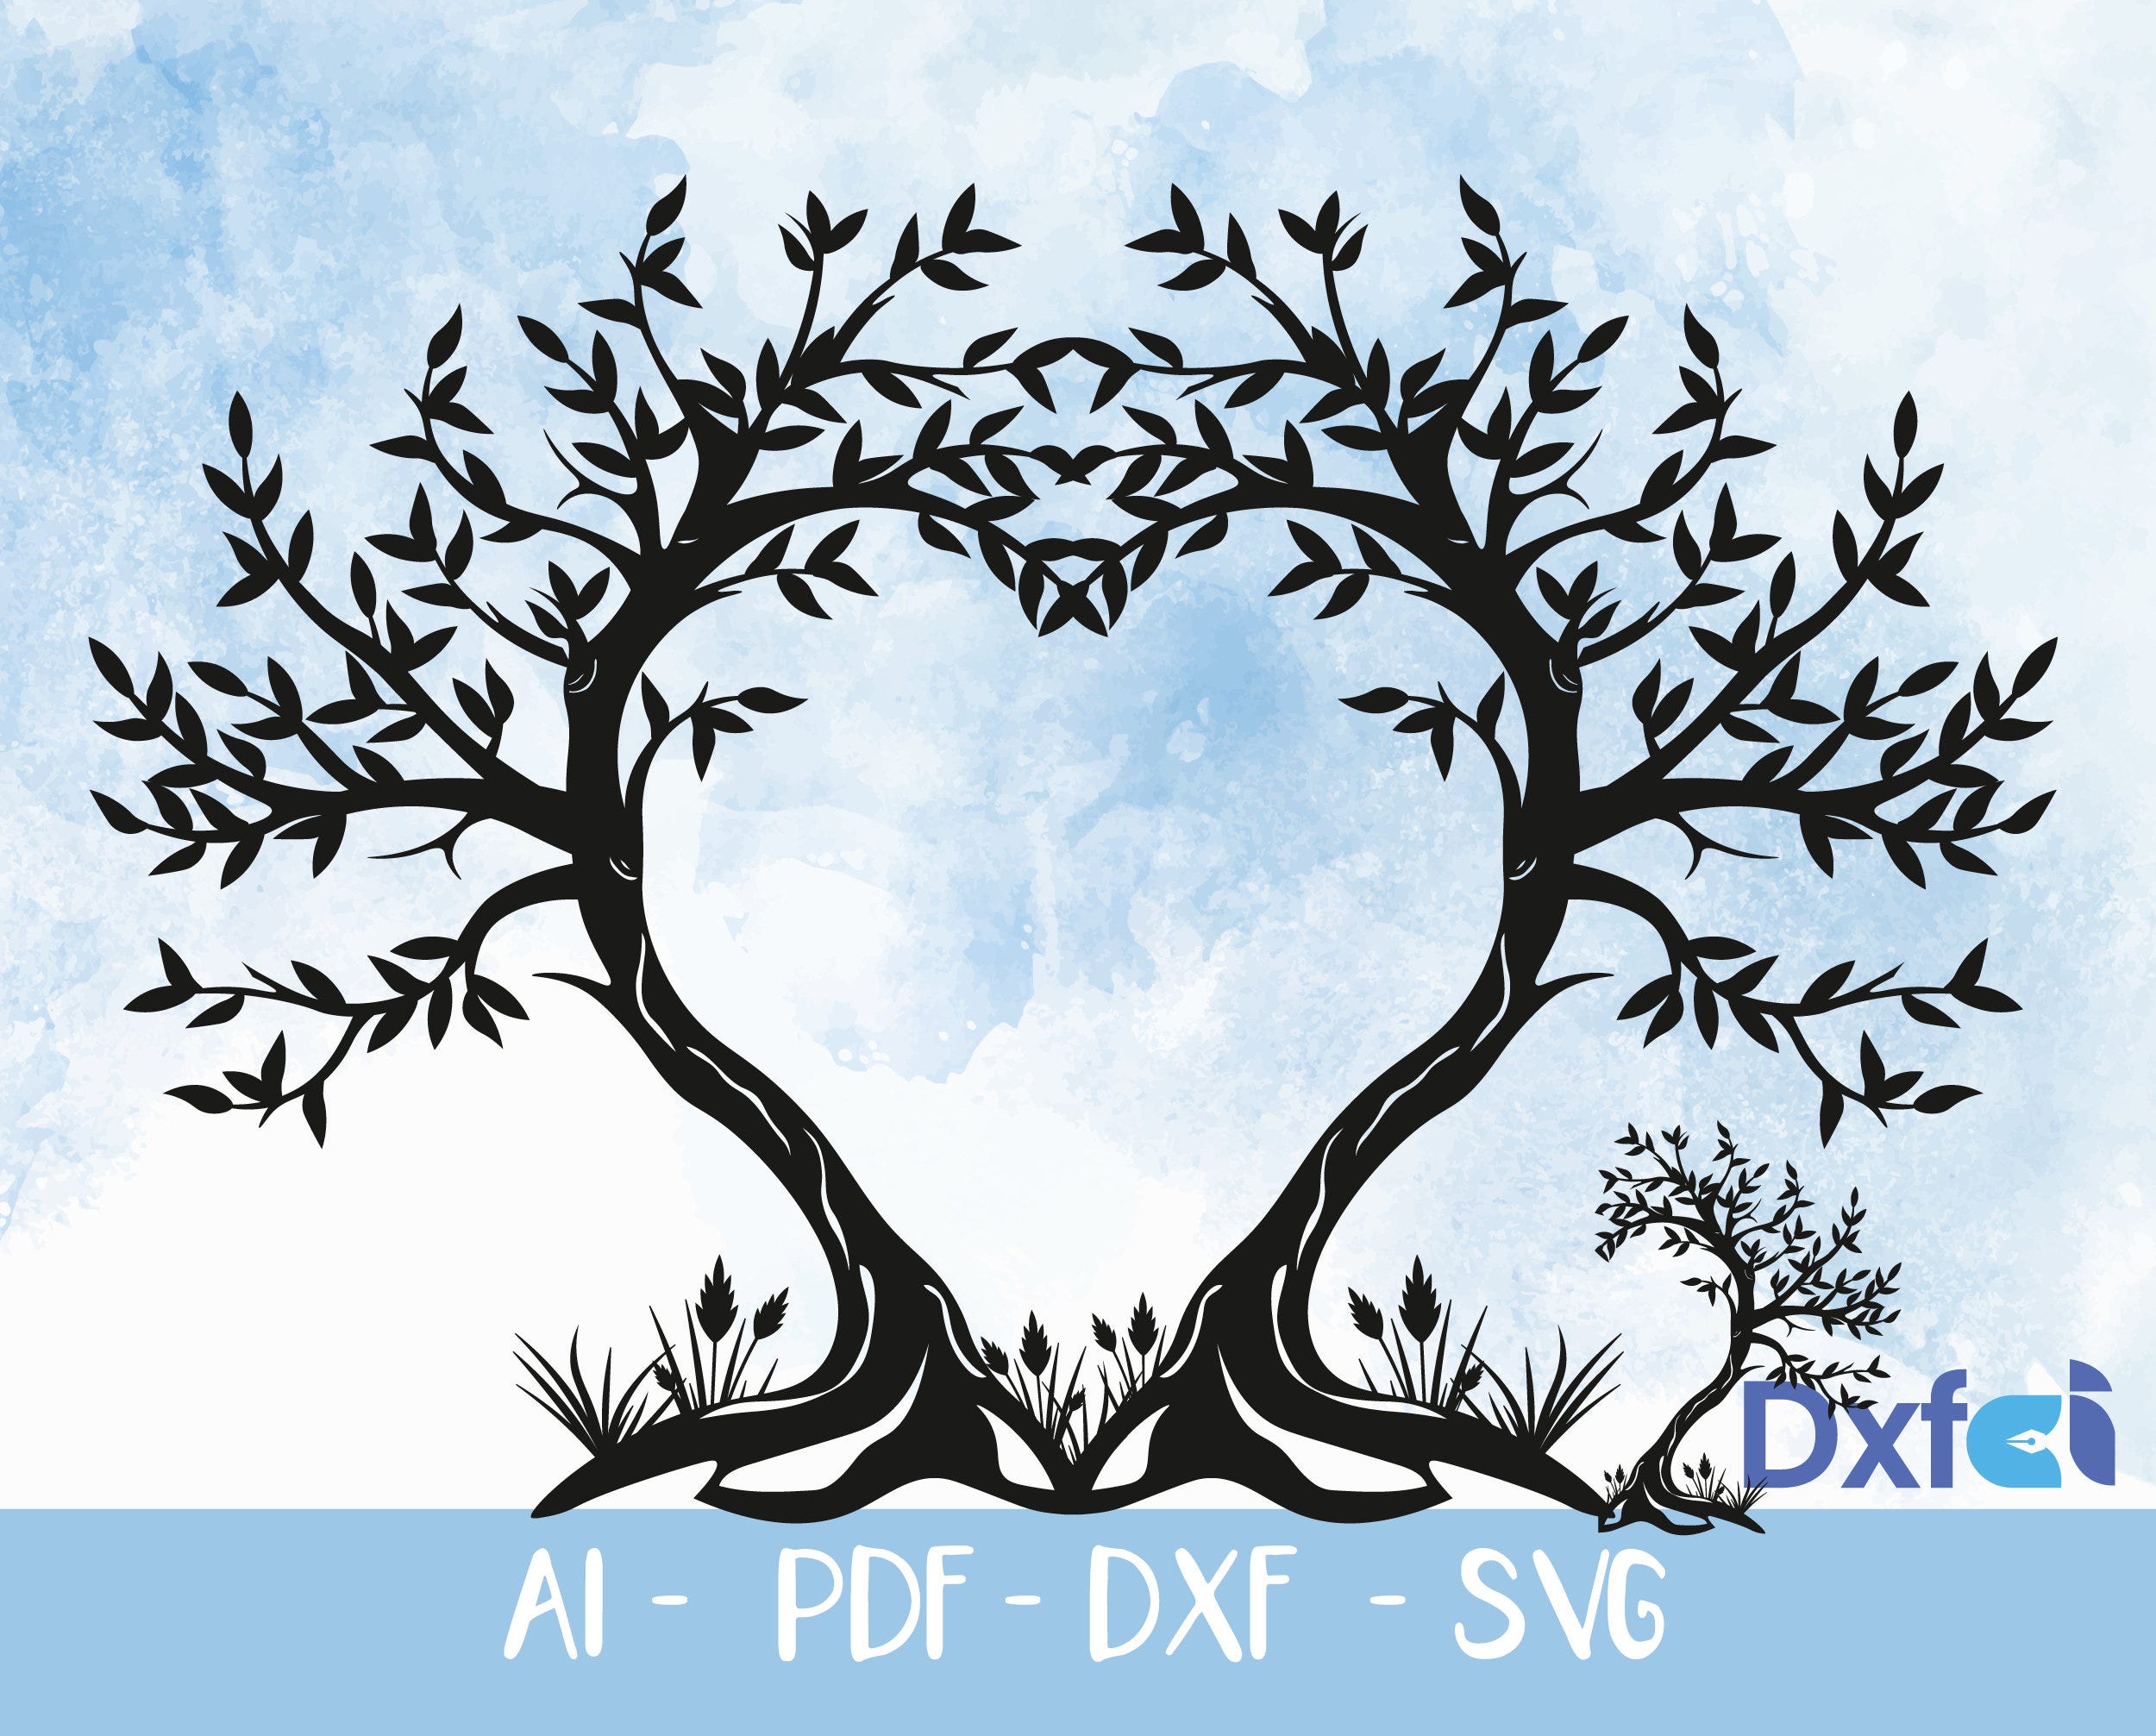 Heart Tree dxf, Love Heart Tree svg, heart with tree dxf, Svg, Eps, Png files, Laser Cut, Plasma Cut, Router, Cricut, Vector Files, Metal